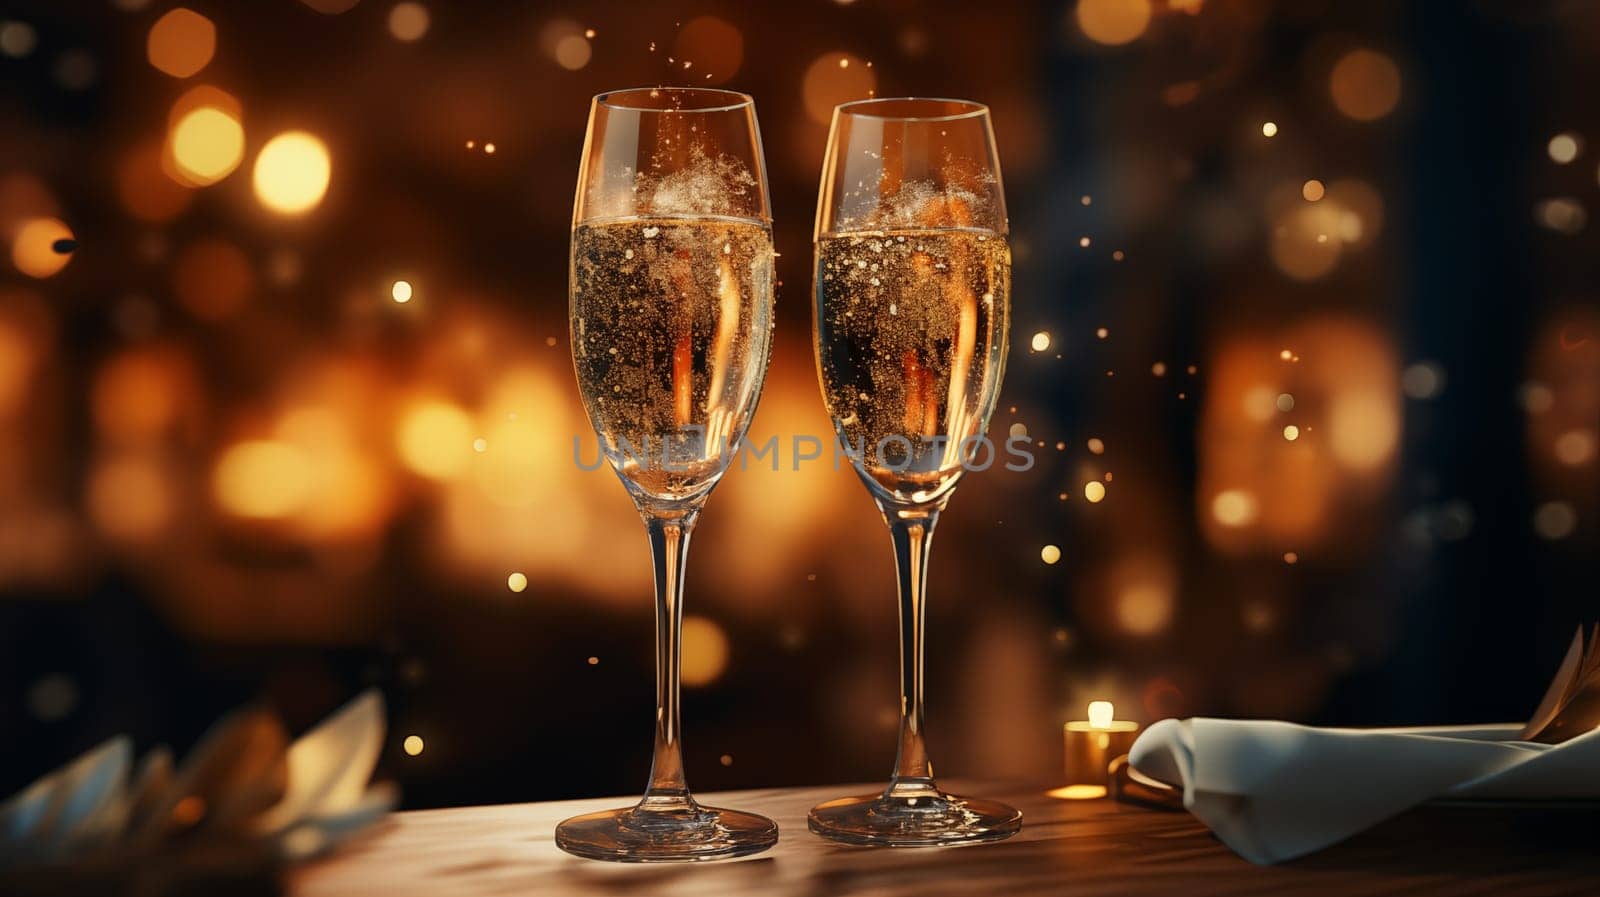 Two glasses of champagne with particles of gold stand on the table in the evening, surrounded by golden bokeh lights.